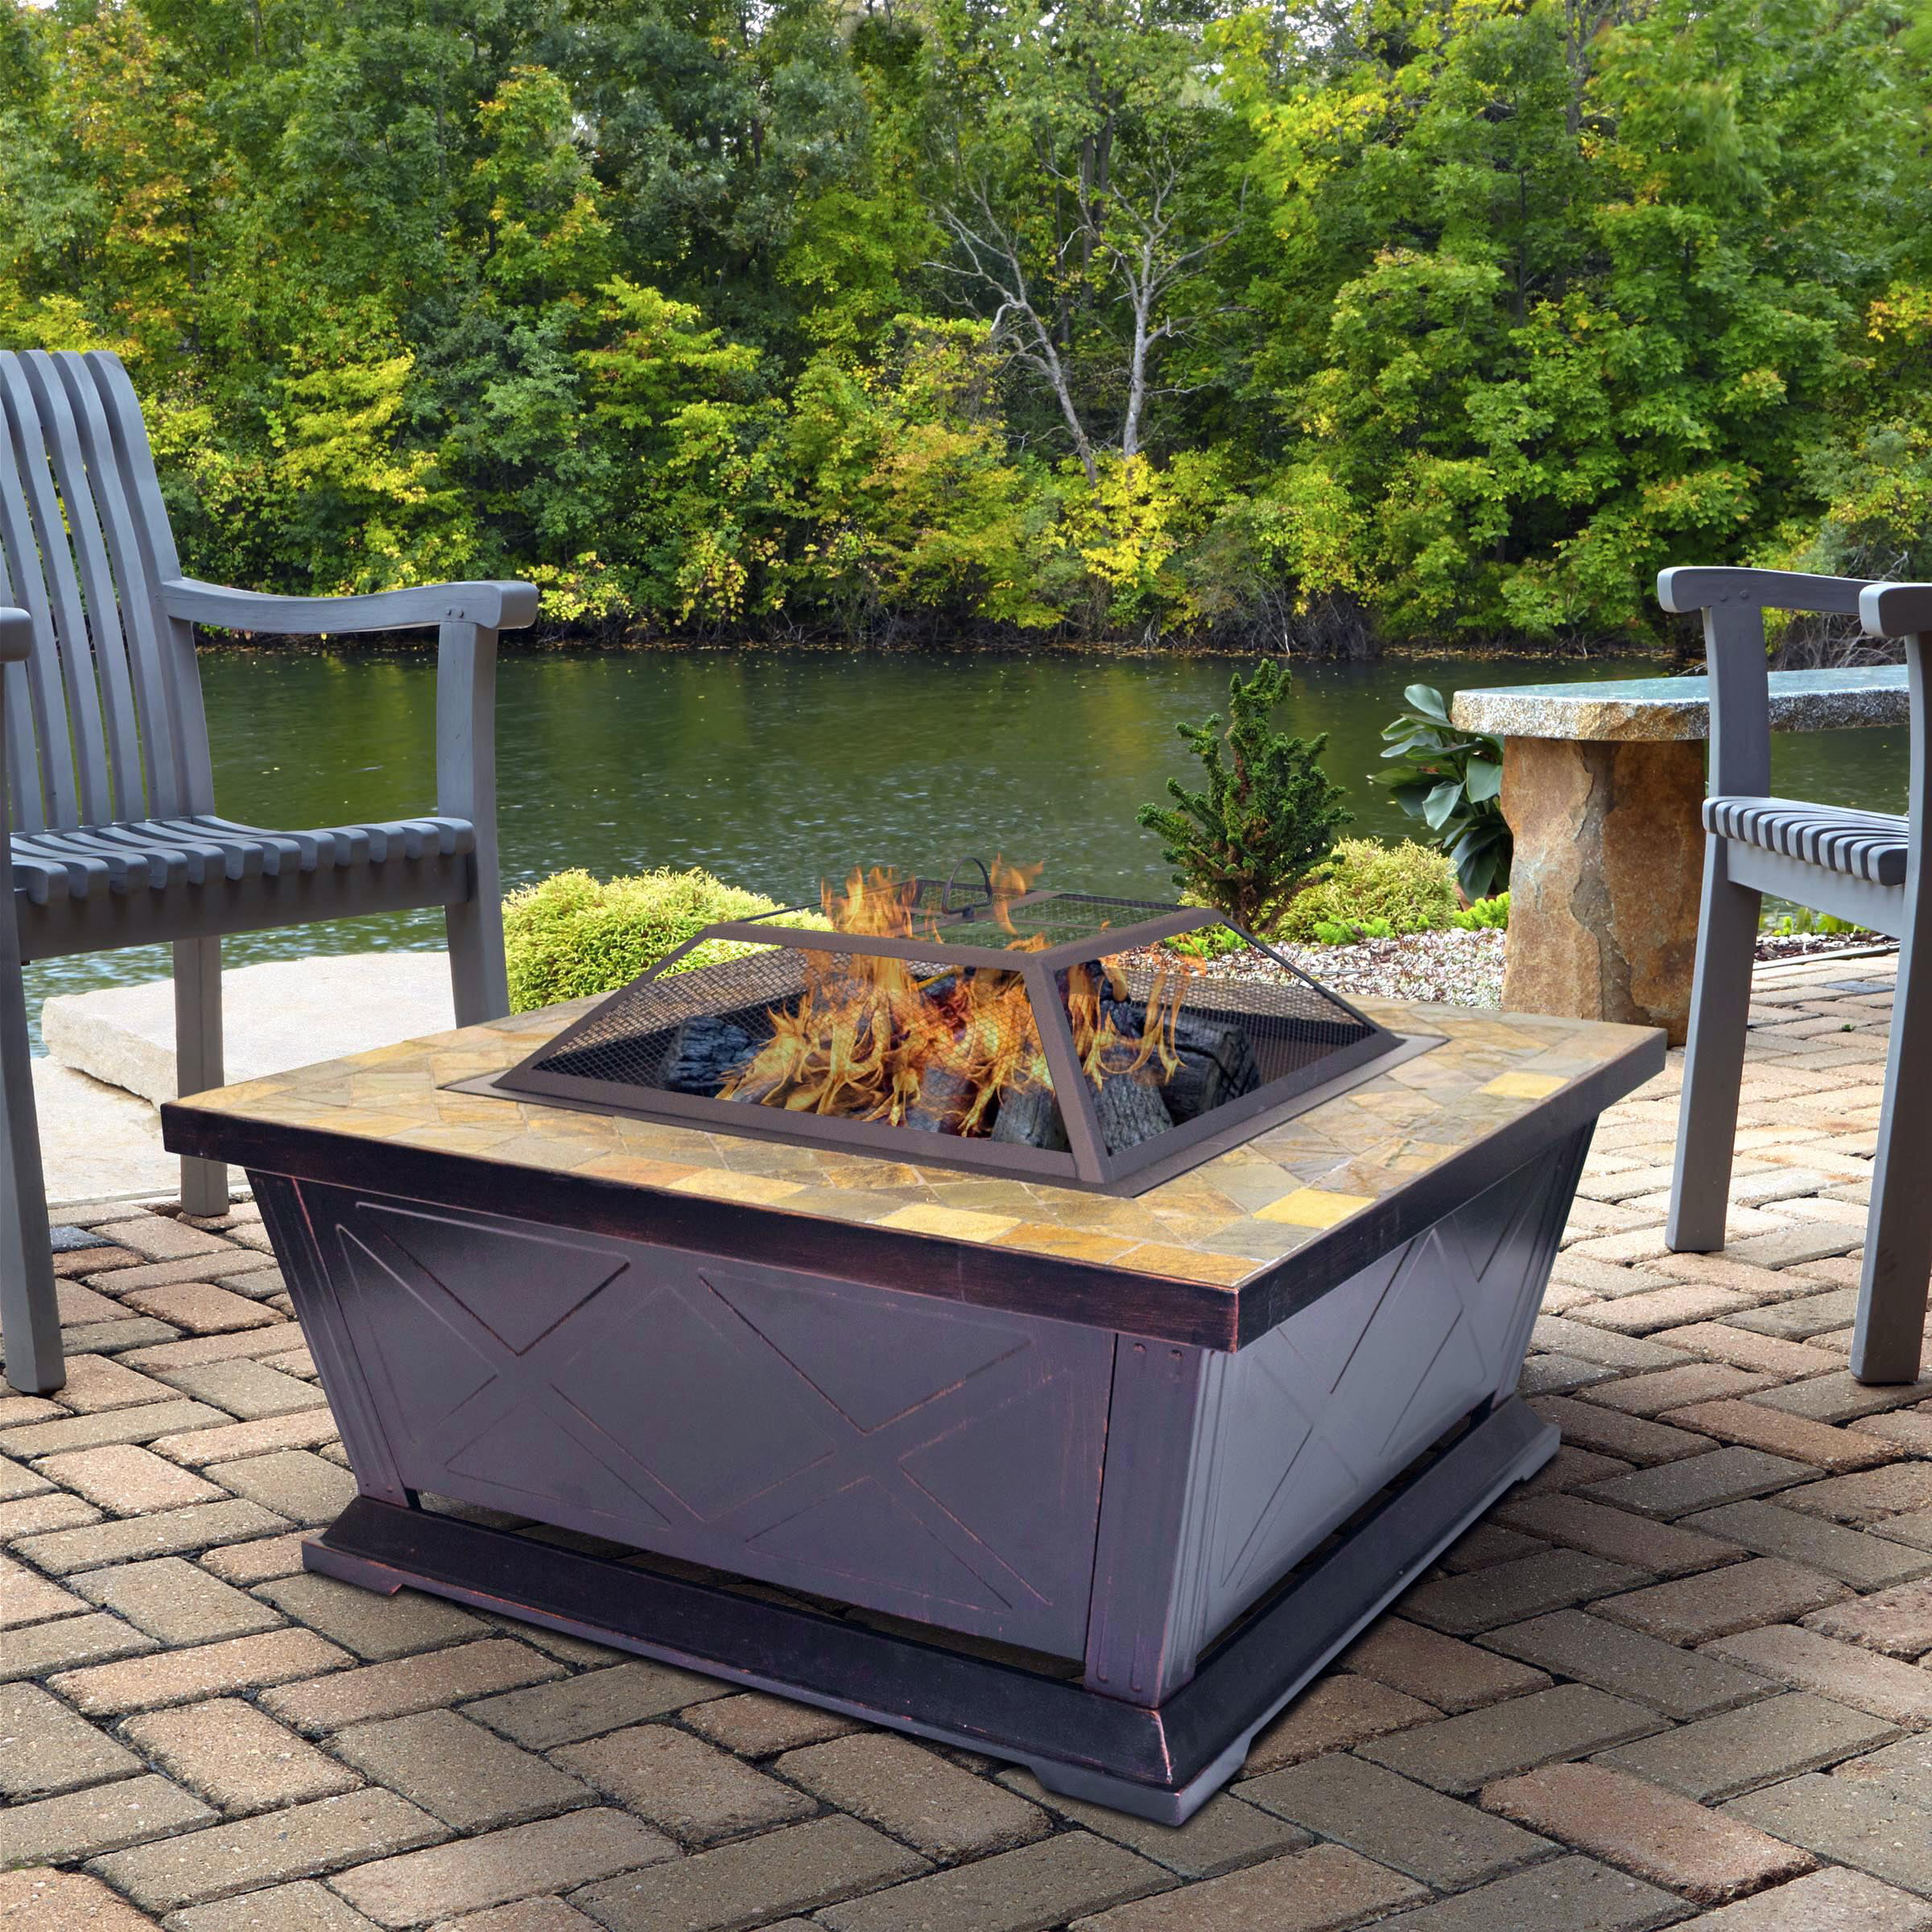 Outdoor Leisure S 36 Inch Square Steel Fire Pit With Decorative Slate Hearth And Oil Rubbed Bronze Finish, Will A Fire Pit Damage My Porcelain Patio